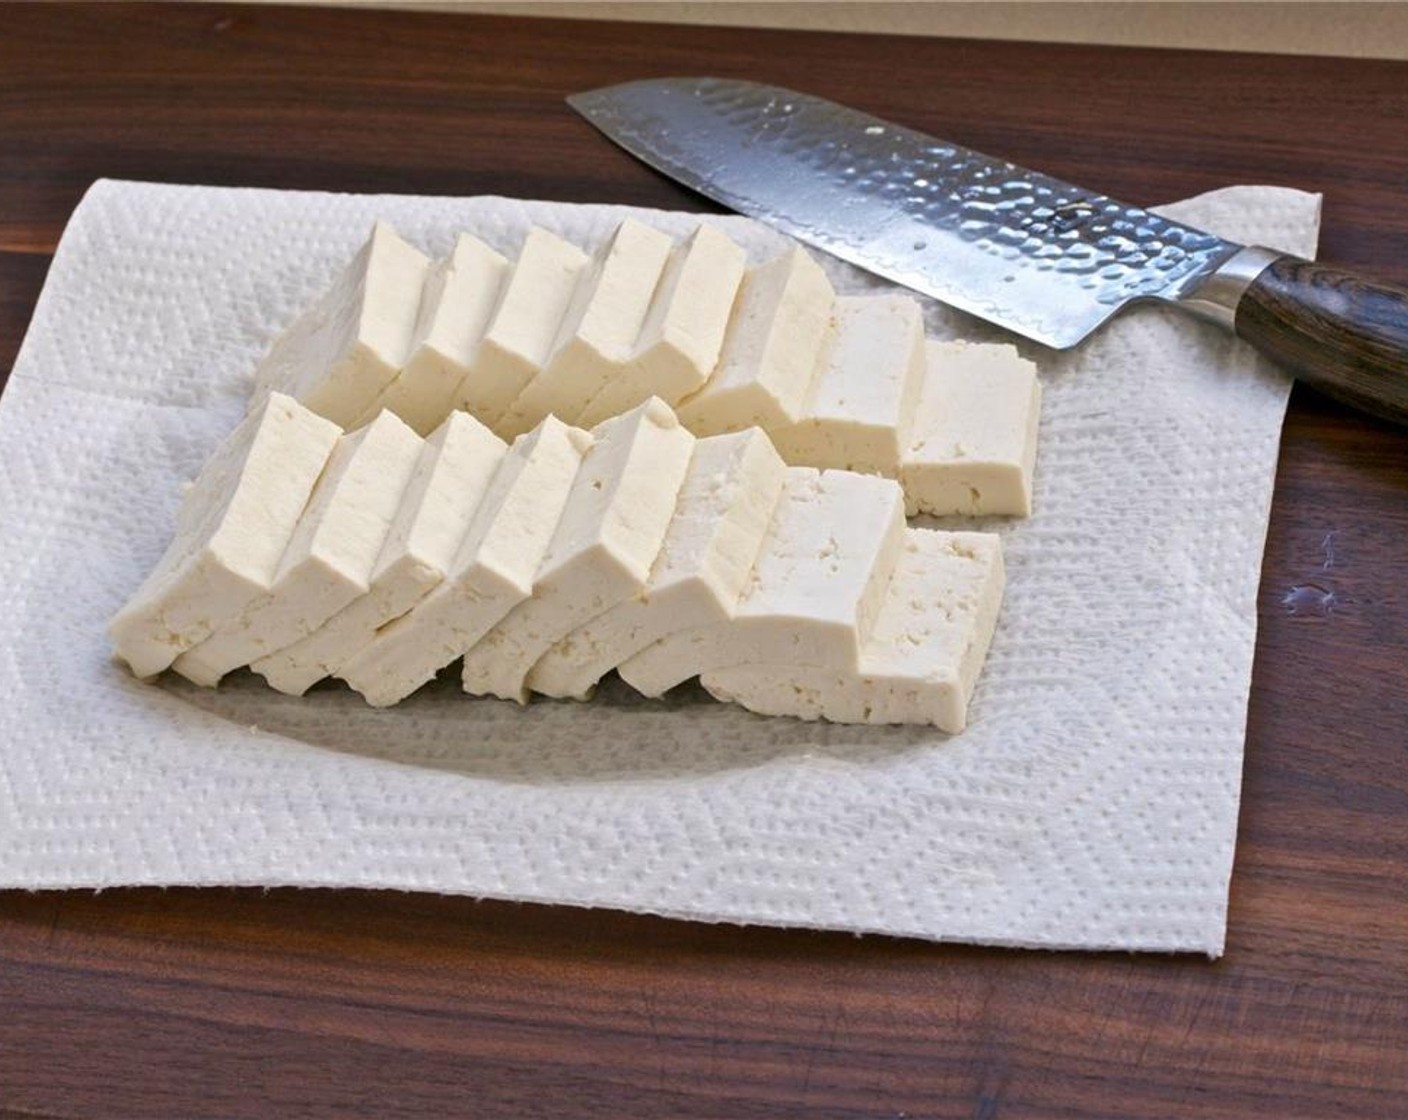 step 4 Place the Firm Tofu (1.1 lb) on top of two layers of paper towels over the cutting board. Cut the tofu in half and slice each half into equal slices.